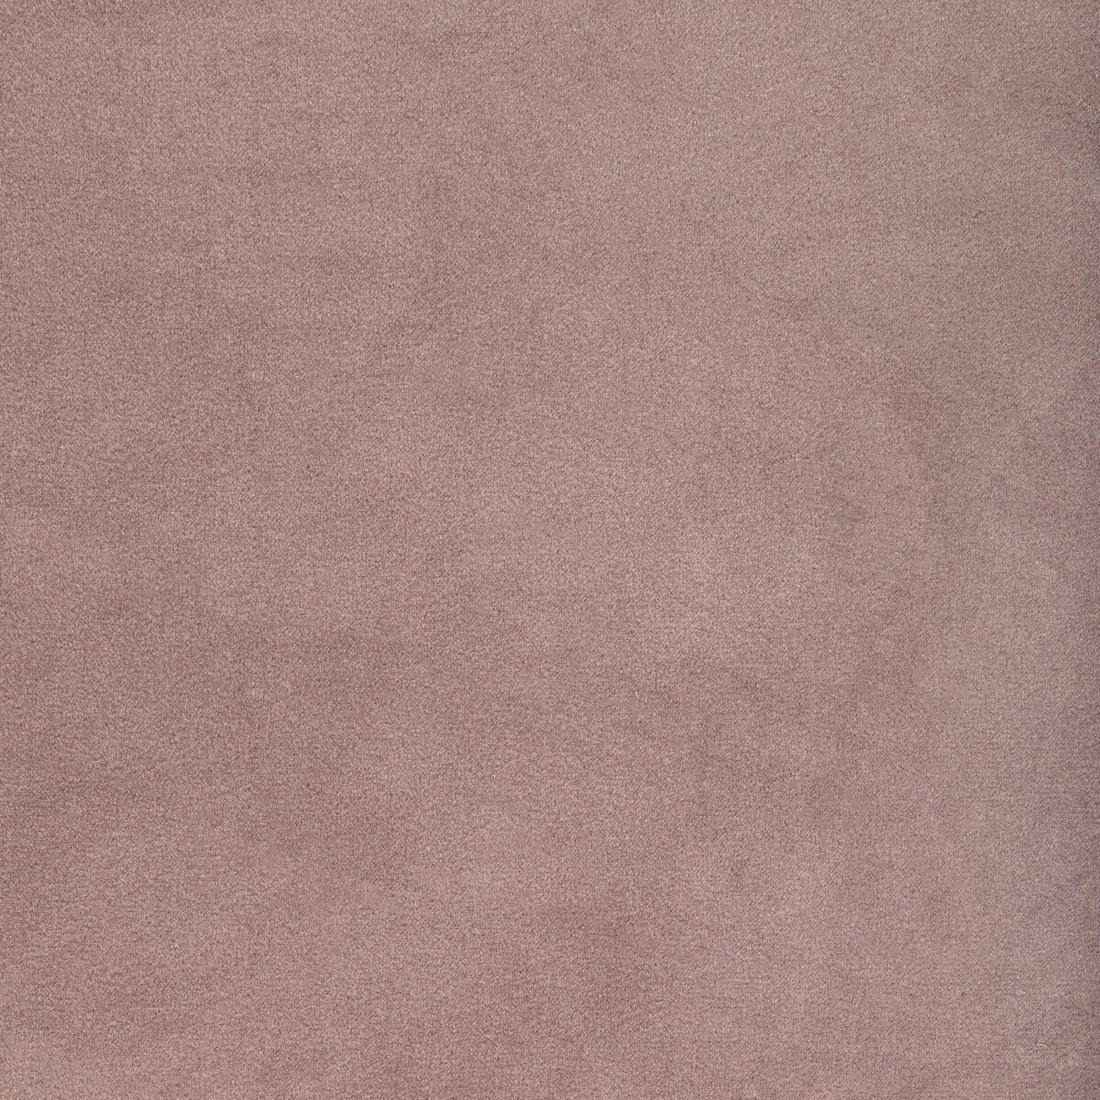 Rocco Velvet fabric in wisteria color - pattern 36652.110.0 - by Kravet Contract